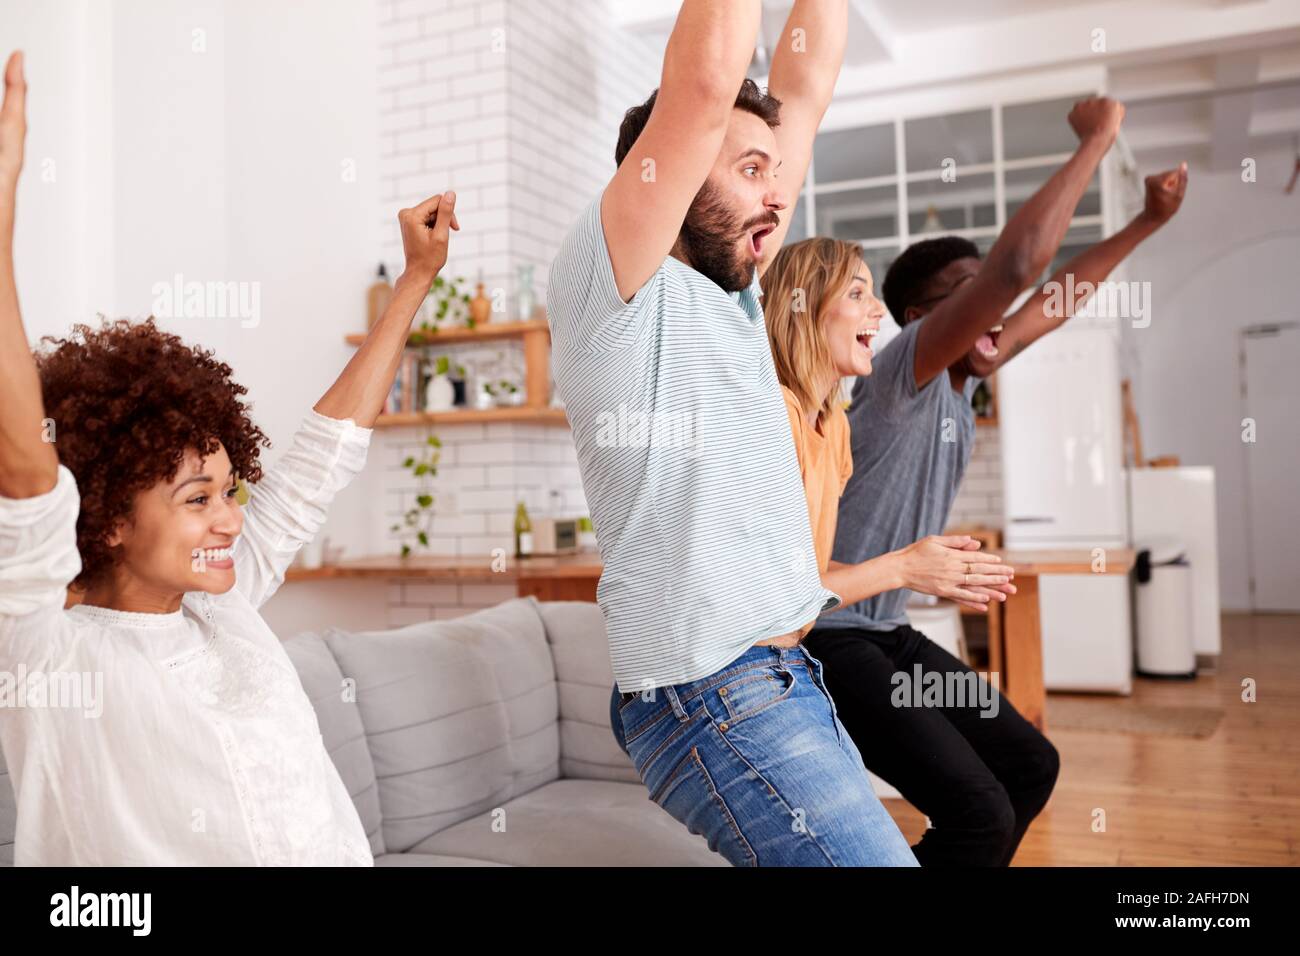 Excited Group Of Friends Sitting On Sofa Watching Sports On TV And Celebrating Stock Photo